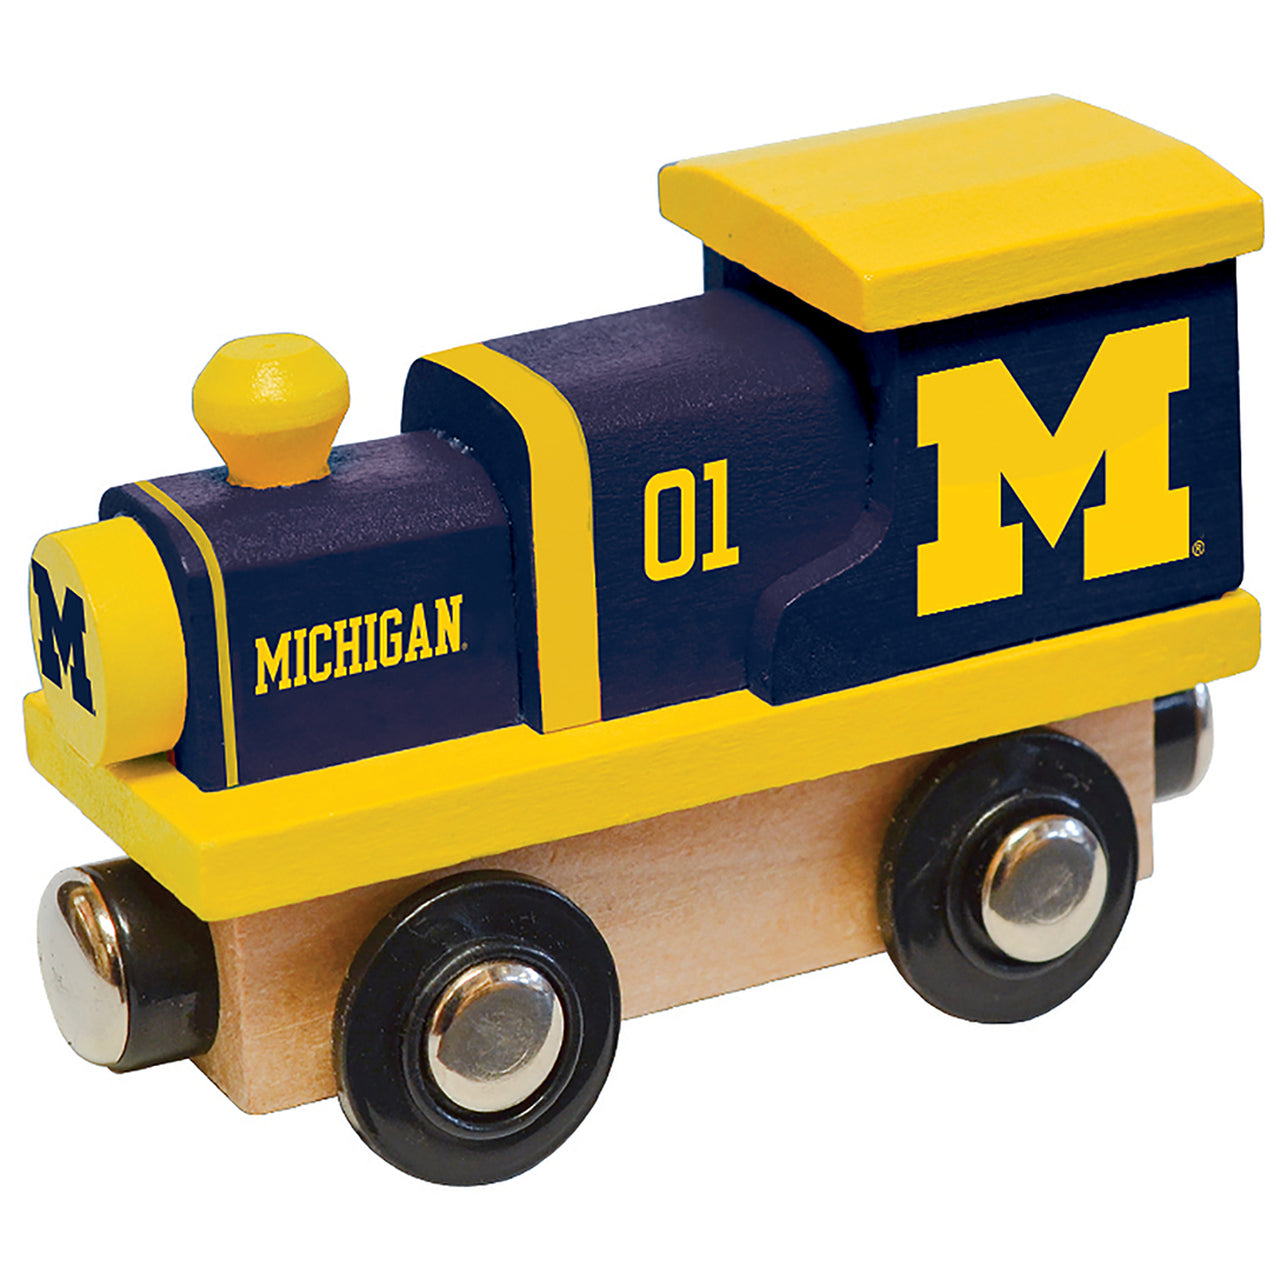 Michigan Wolverines Wooden Toy Train Engine by Masterpieces